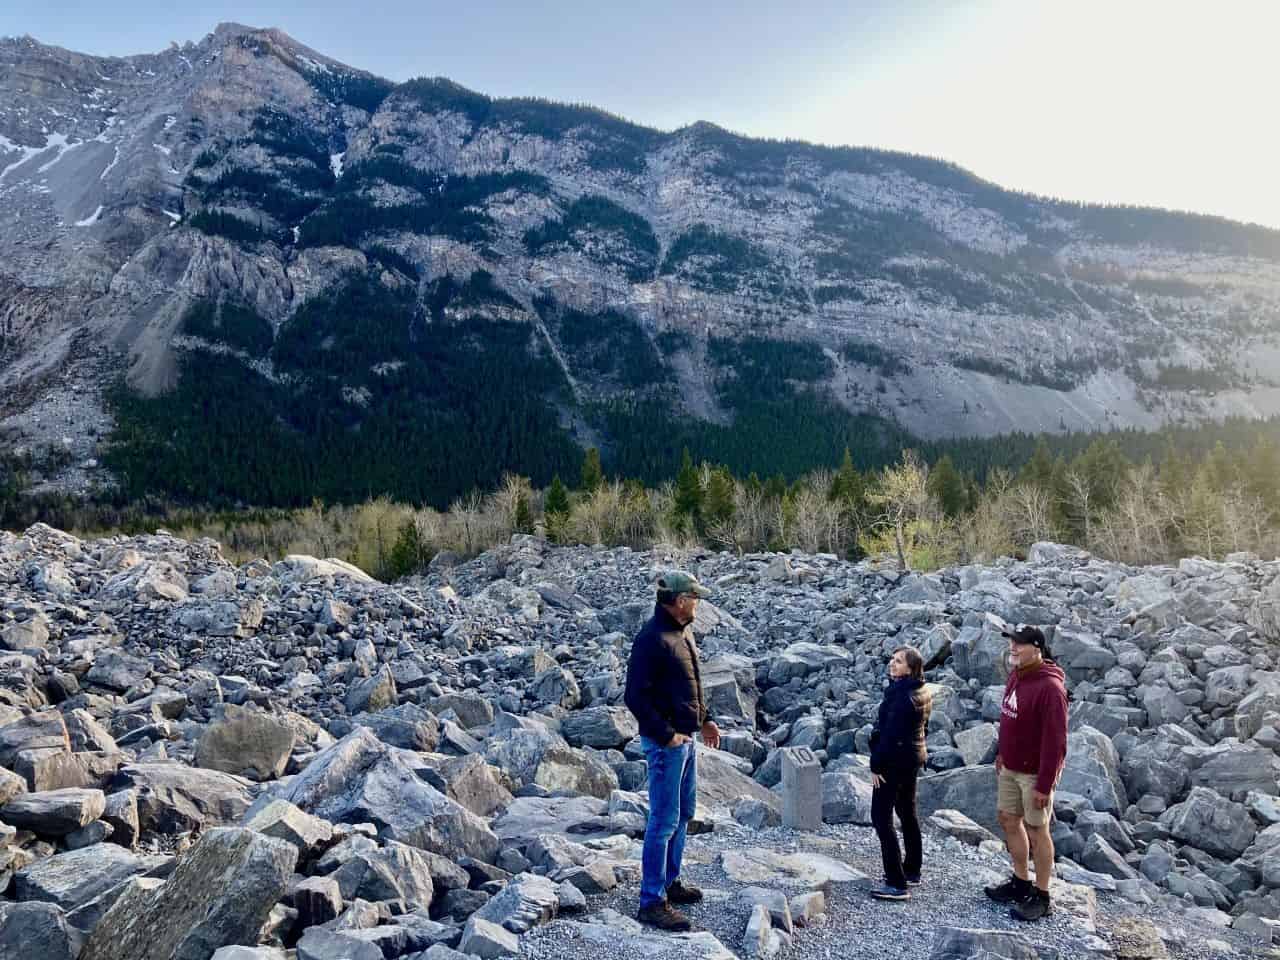 Two men and a woman standing among large boulders with mountain in background at Frank Slide.